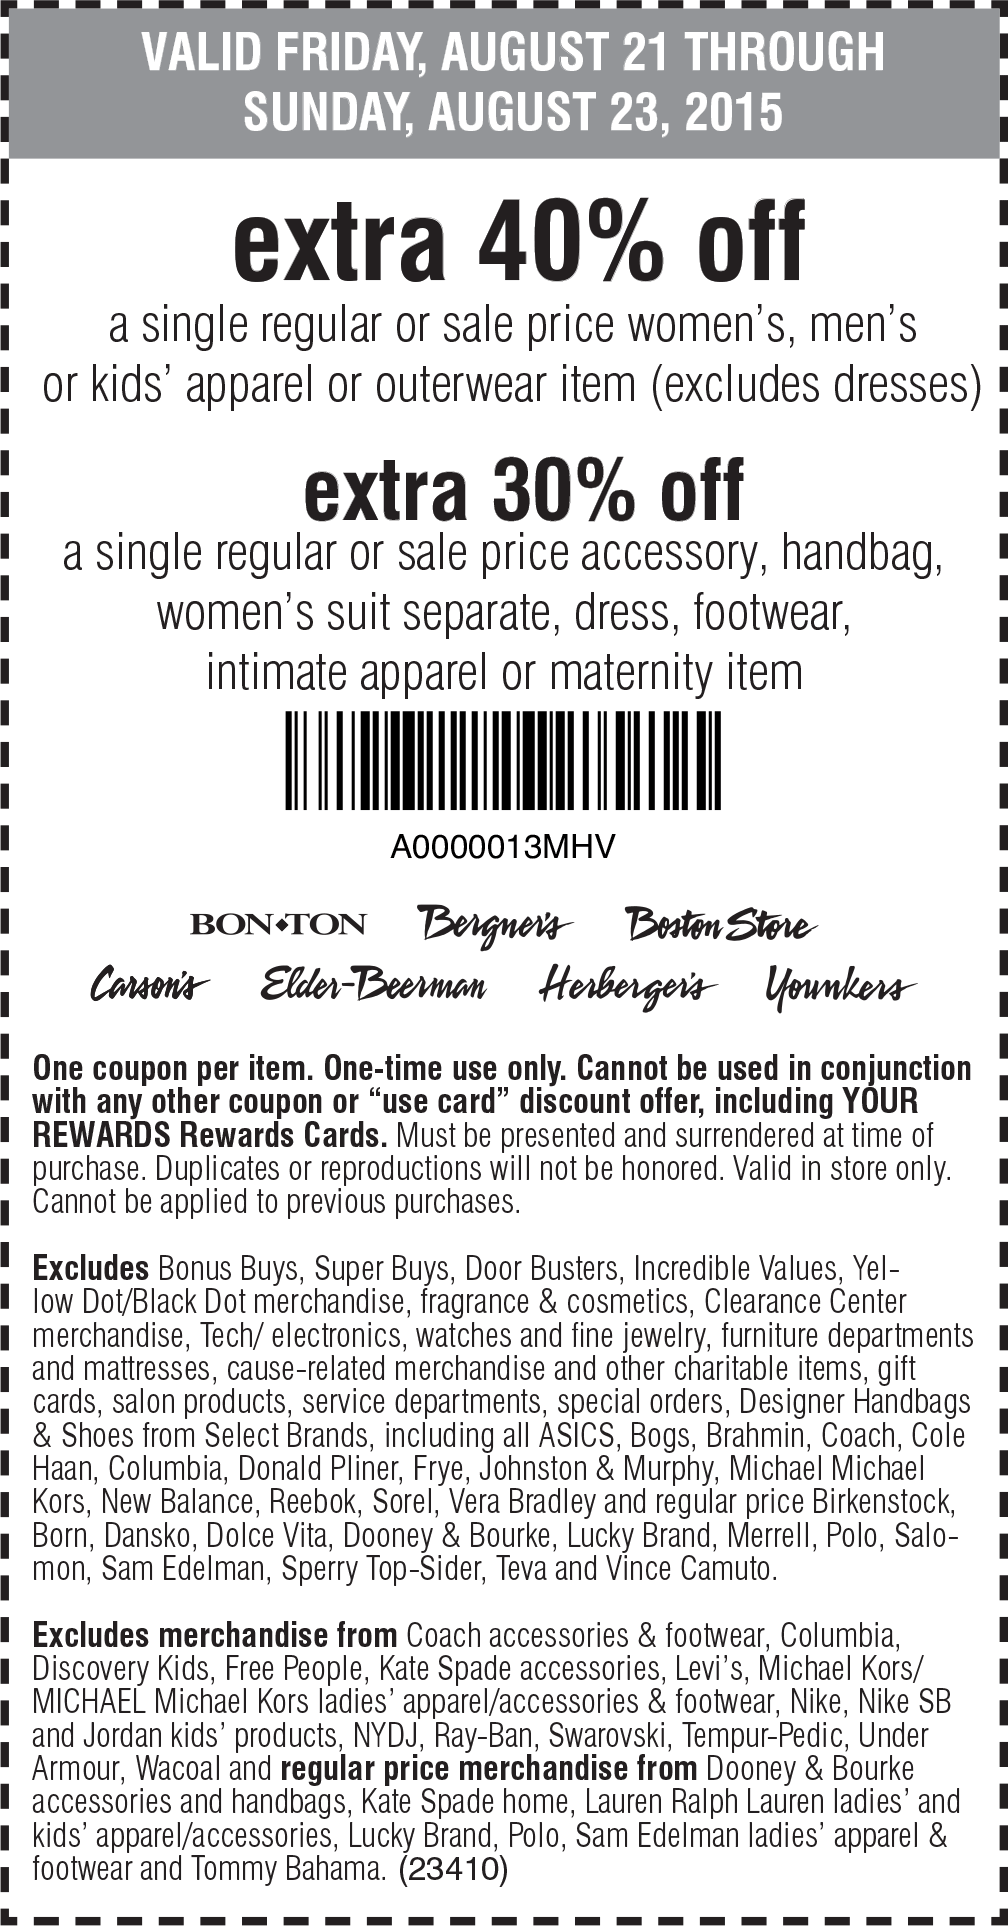 Bon Ton Coupon March 2024 Extra 40% off a single item at Carsons, Bon Ton, Bergners, Boston Store, Elder-Beerman, Herbergers & Younkers